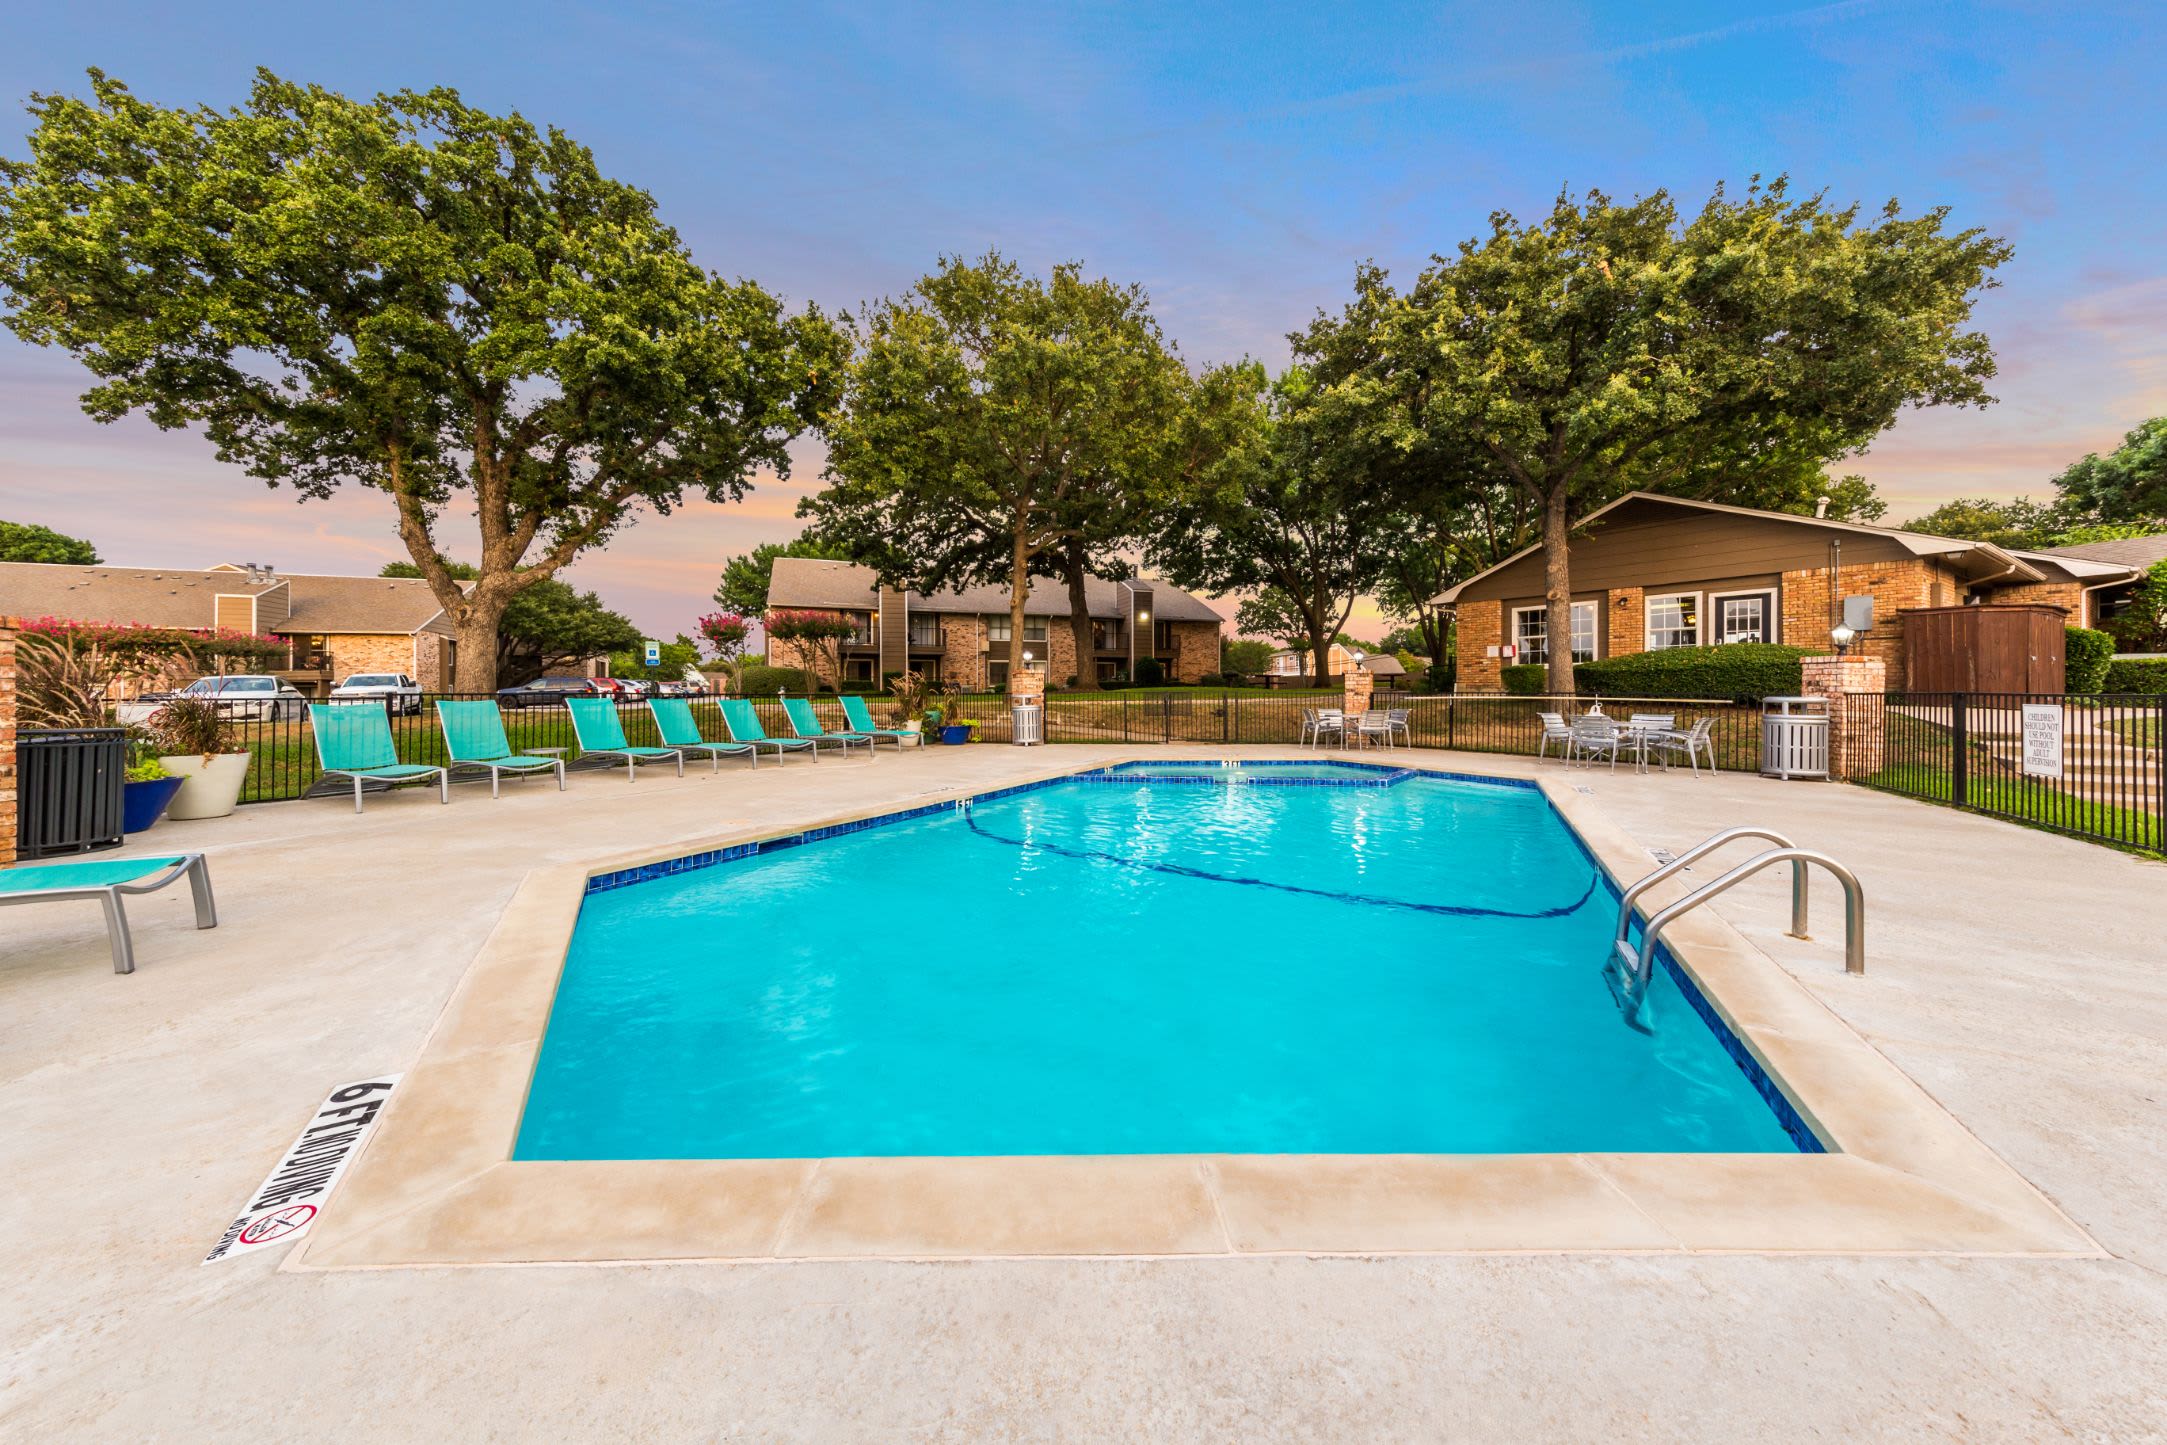 Swimming pool with trees in the background at The Park at Flower Mound in Flower Mound, Texas